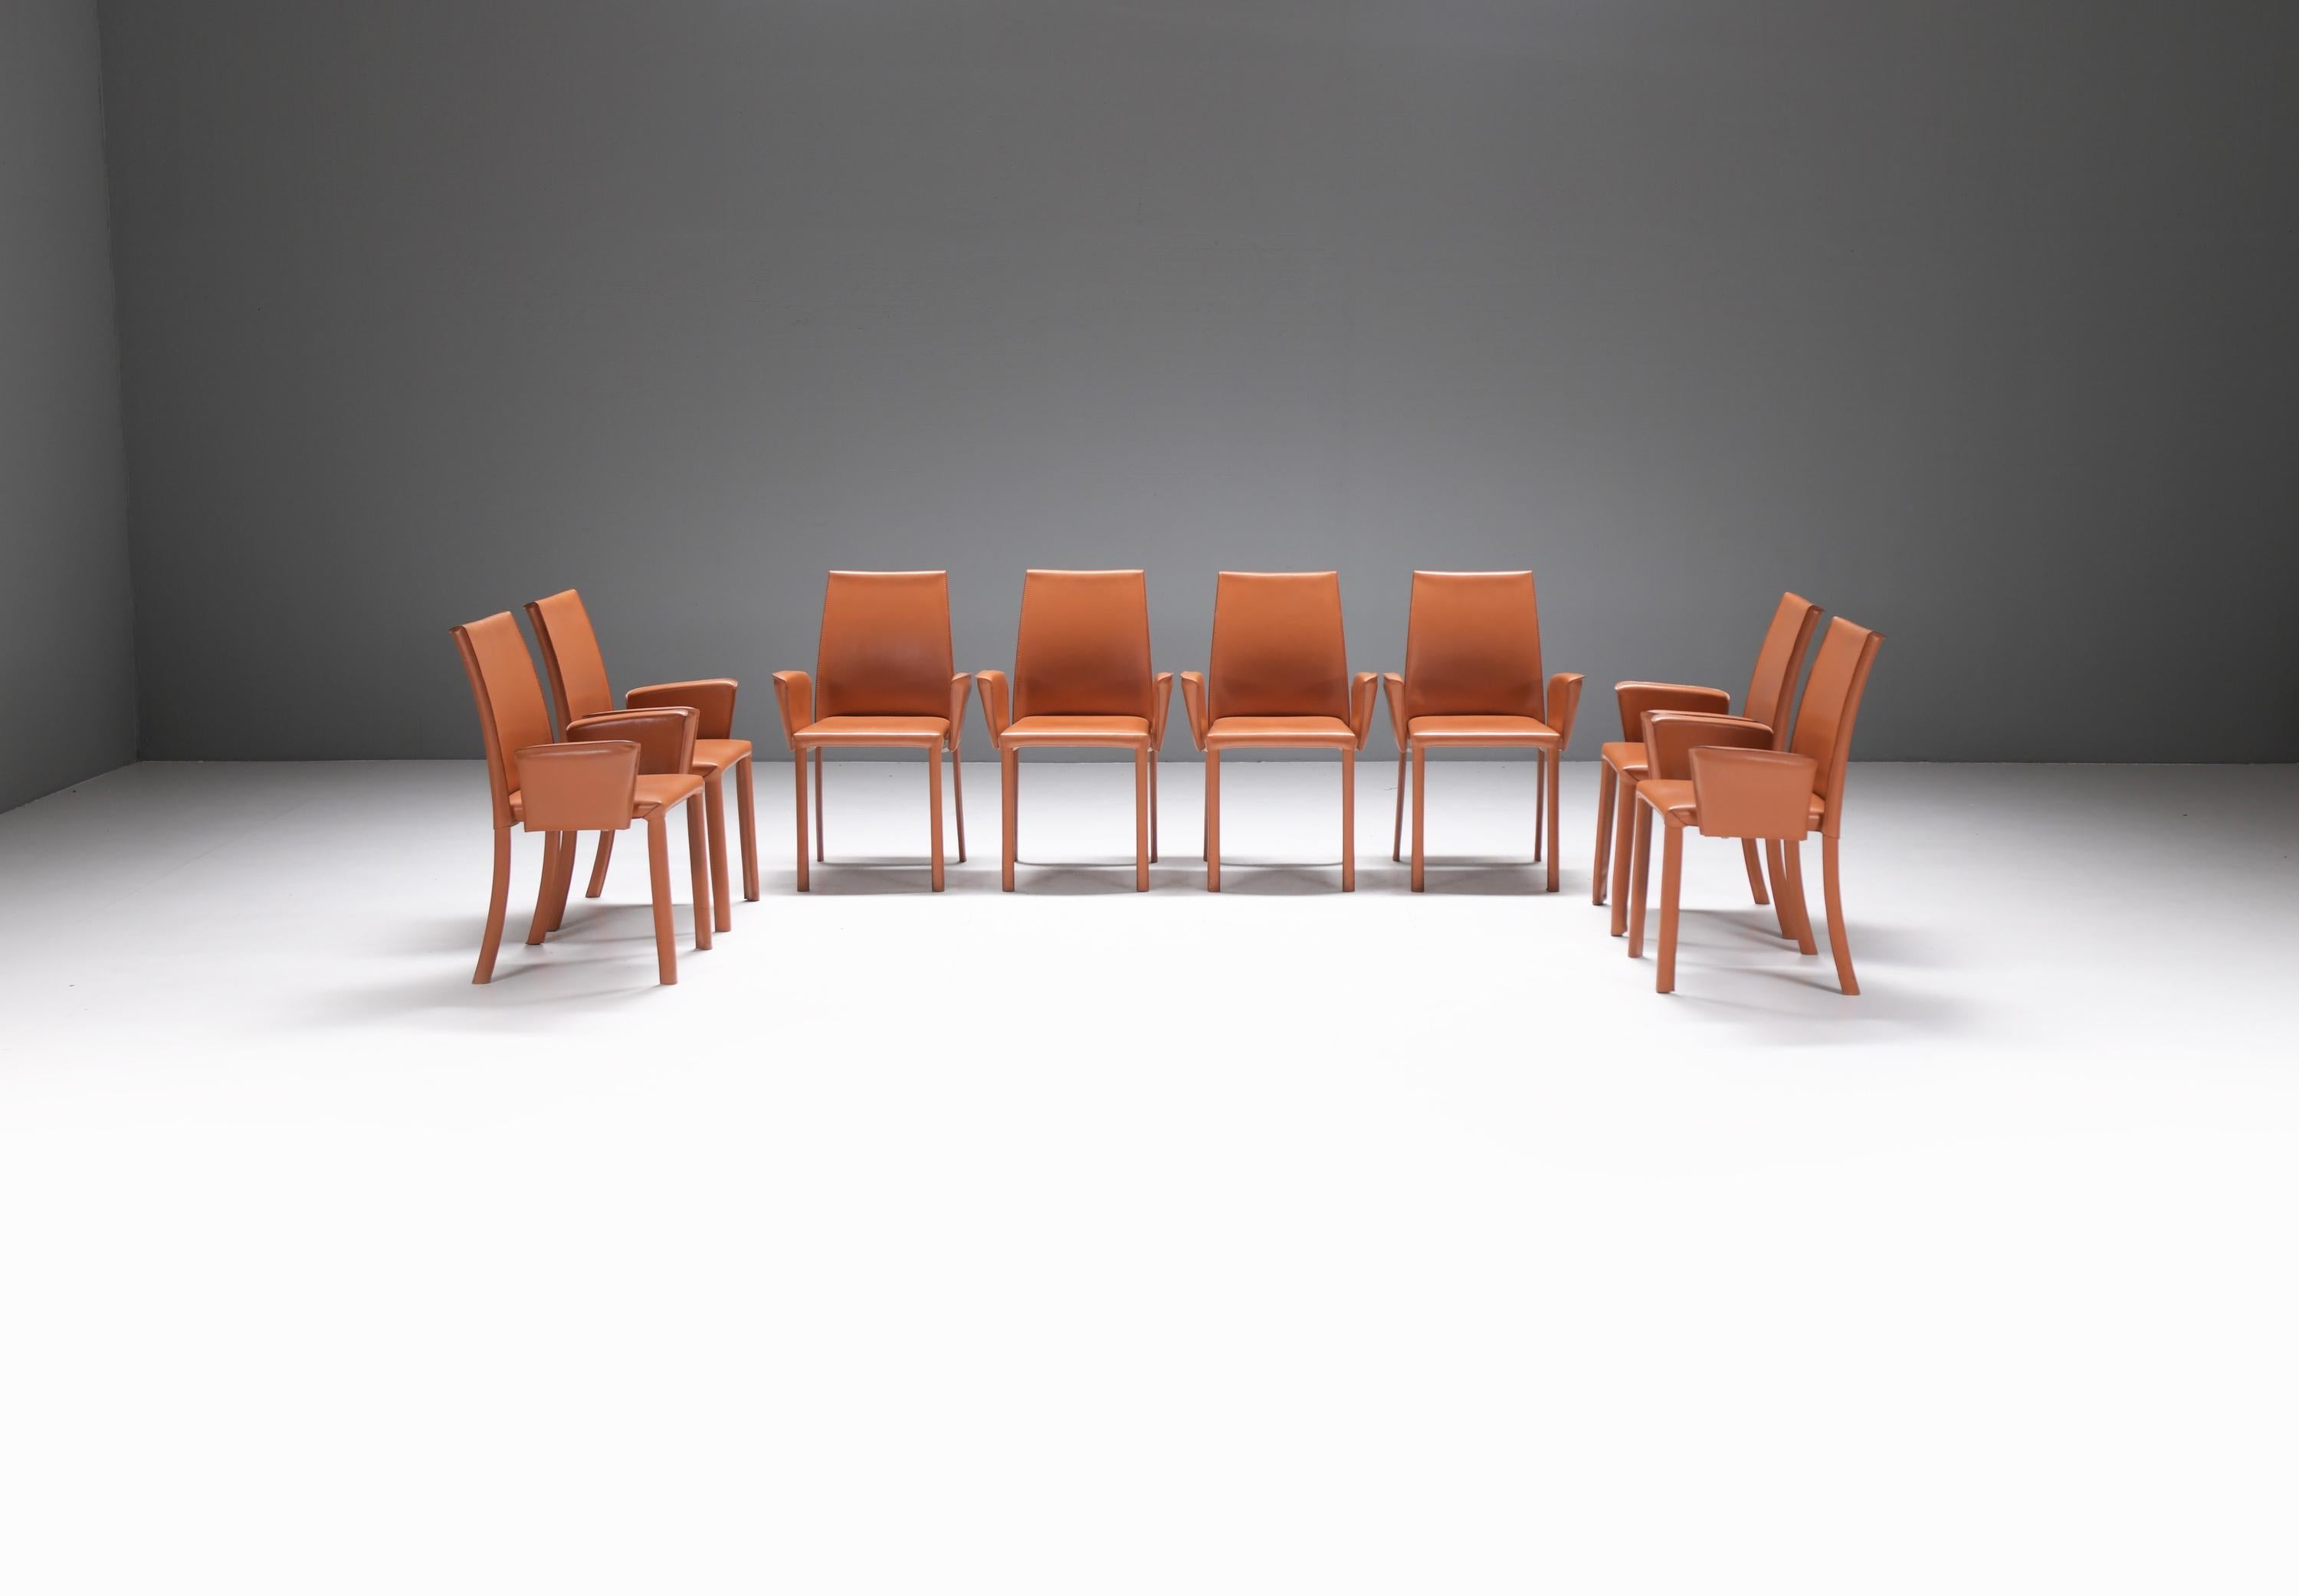 Elegant & comfortable Bottega armchairs in cognac/orange leather.
Designed by Renzo Fauciglietti and Graziella Bianchi for FRAG Italy in 2003

The frame structure is a harmonic sheet steel back that flexes with you for continuous support. Wrapped in